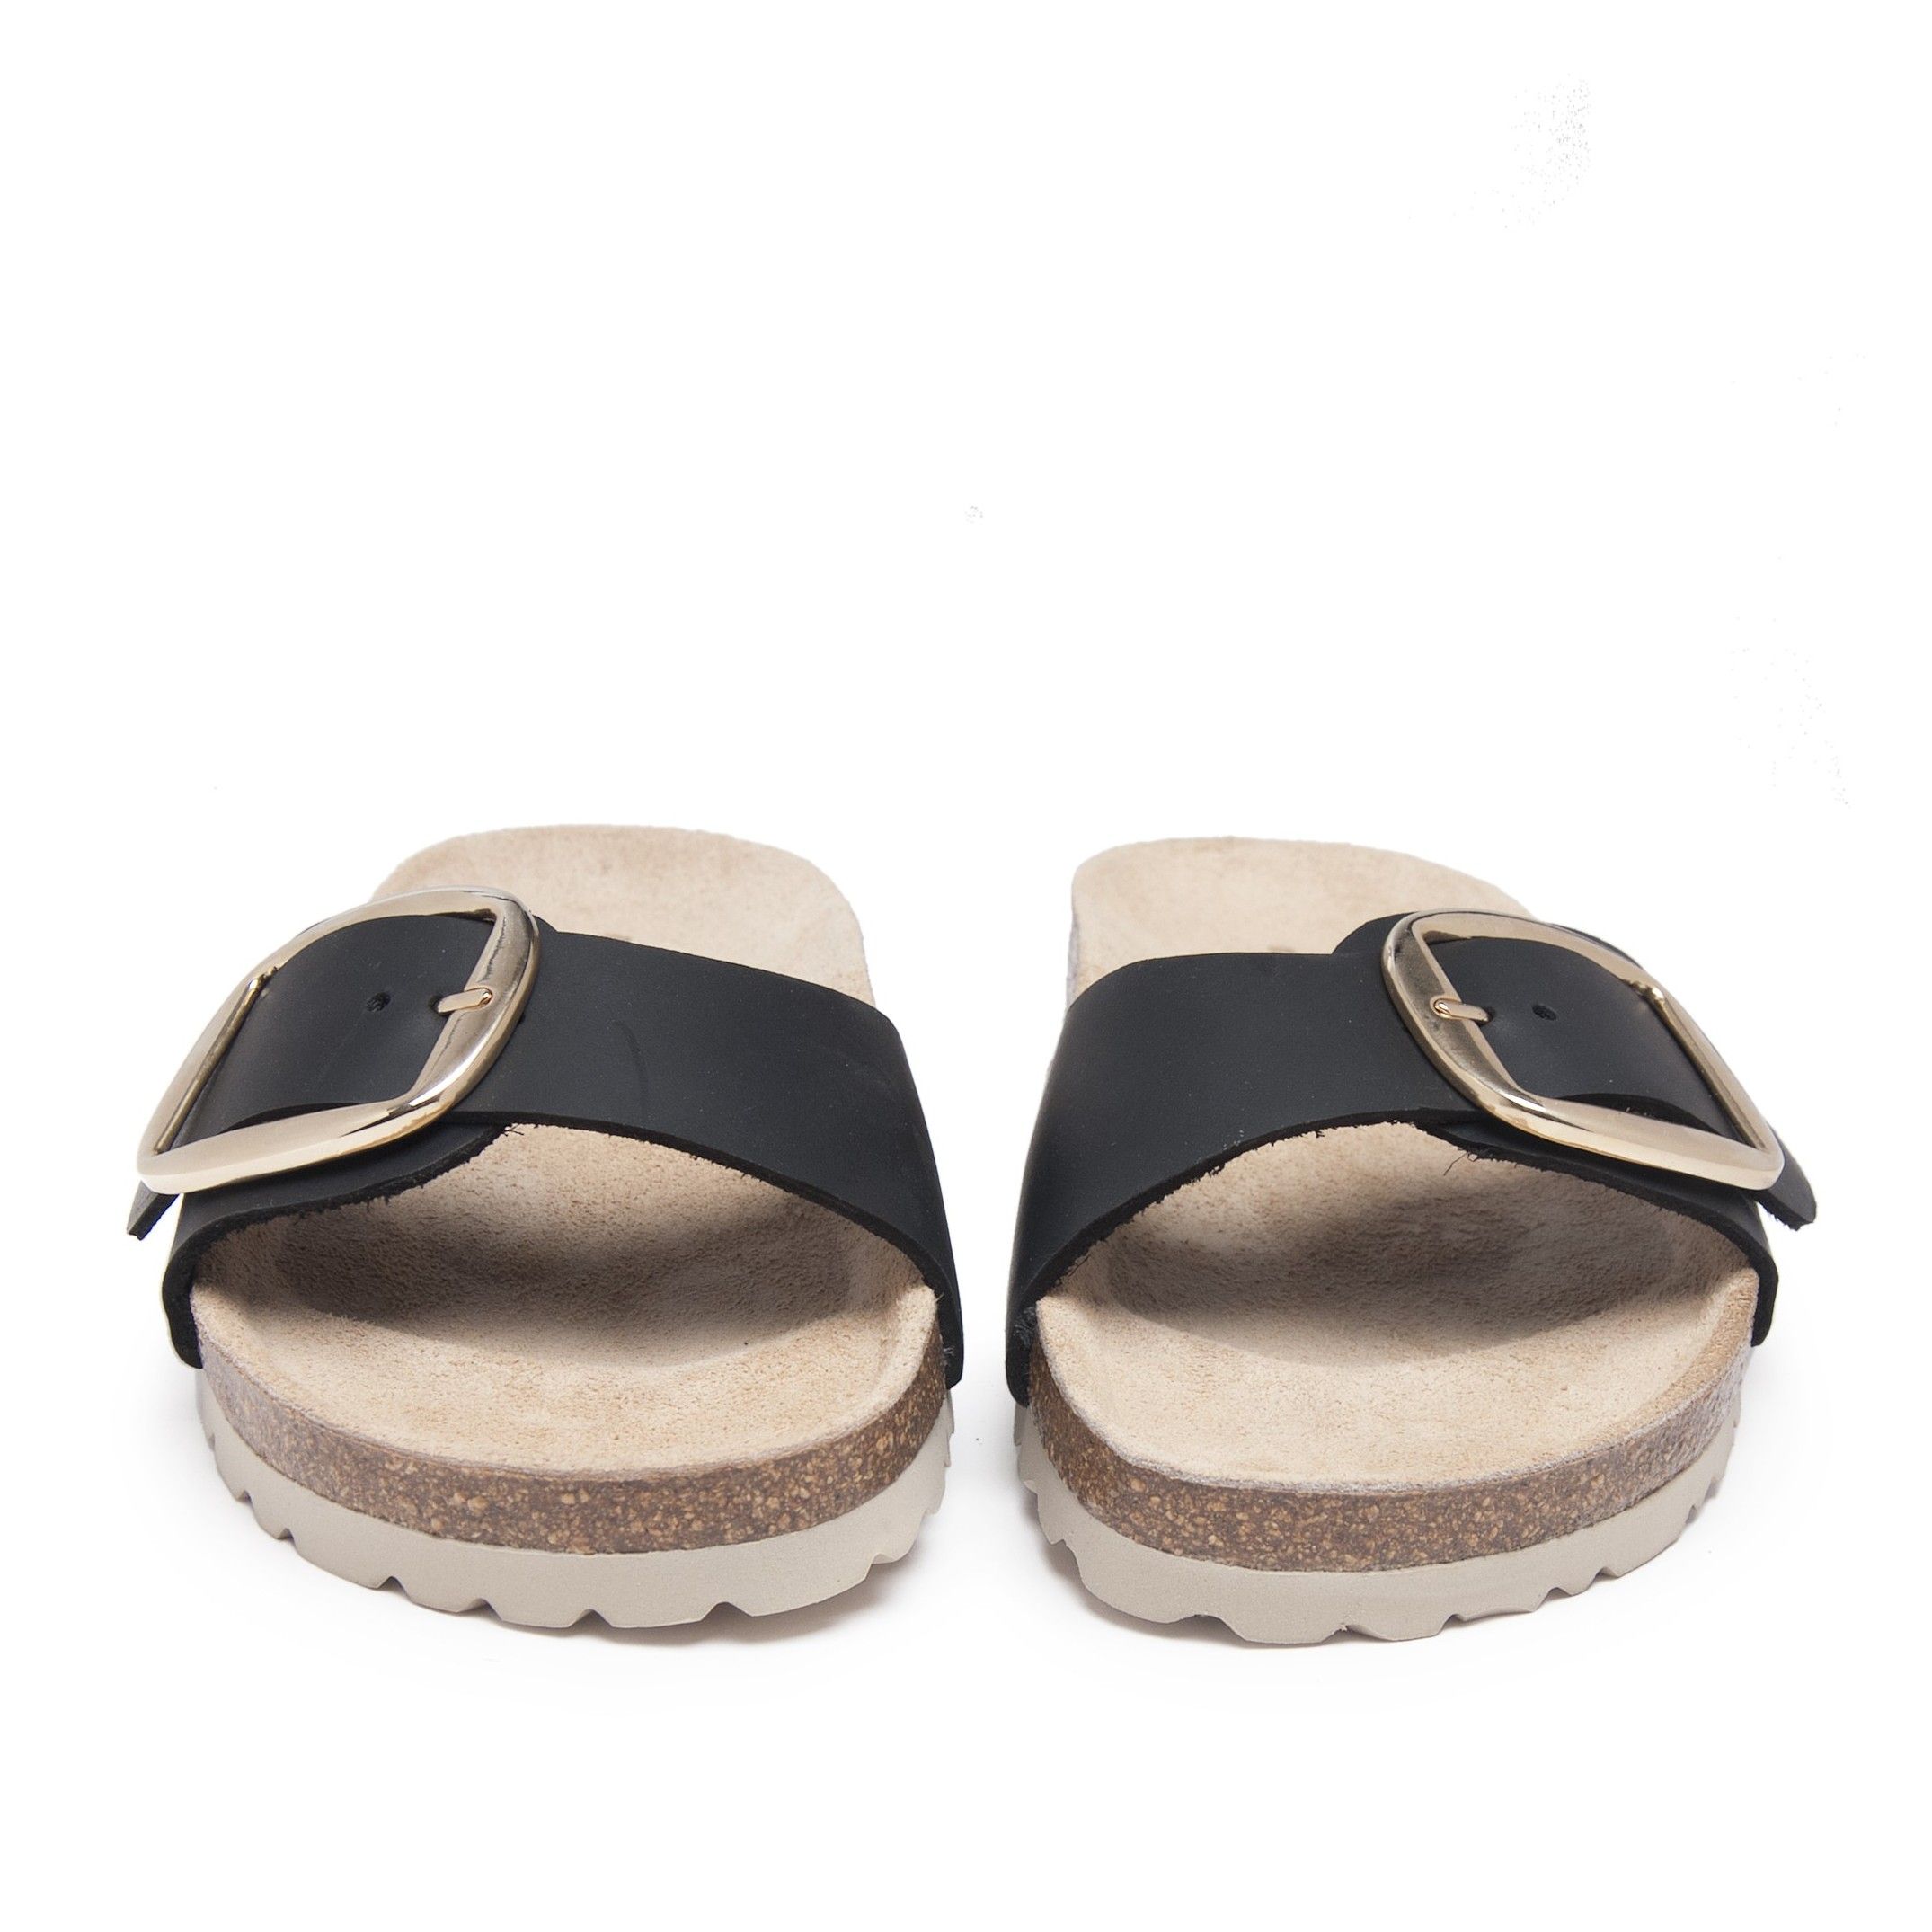 Bio sandal with a leather front buckle. Adjustable metal buckle. Exterior and interior made of leather. Platform: 1 cm. Sole: EVA. This product is manufactured in Spain.